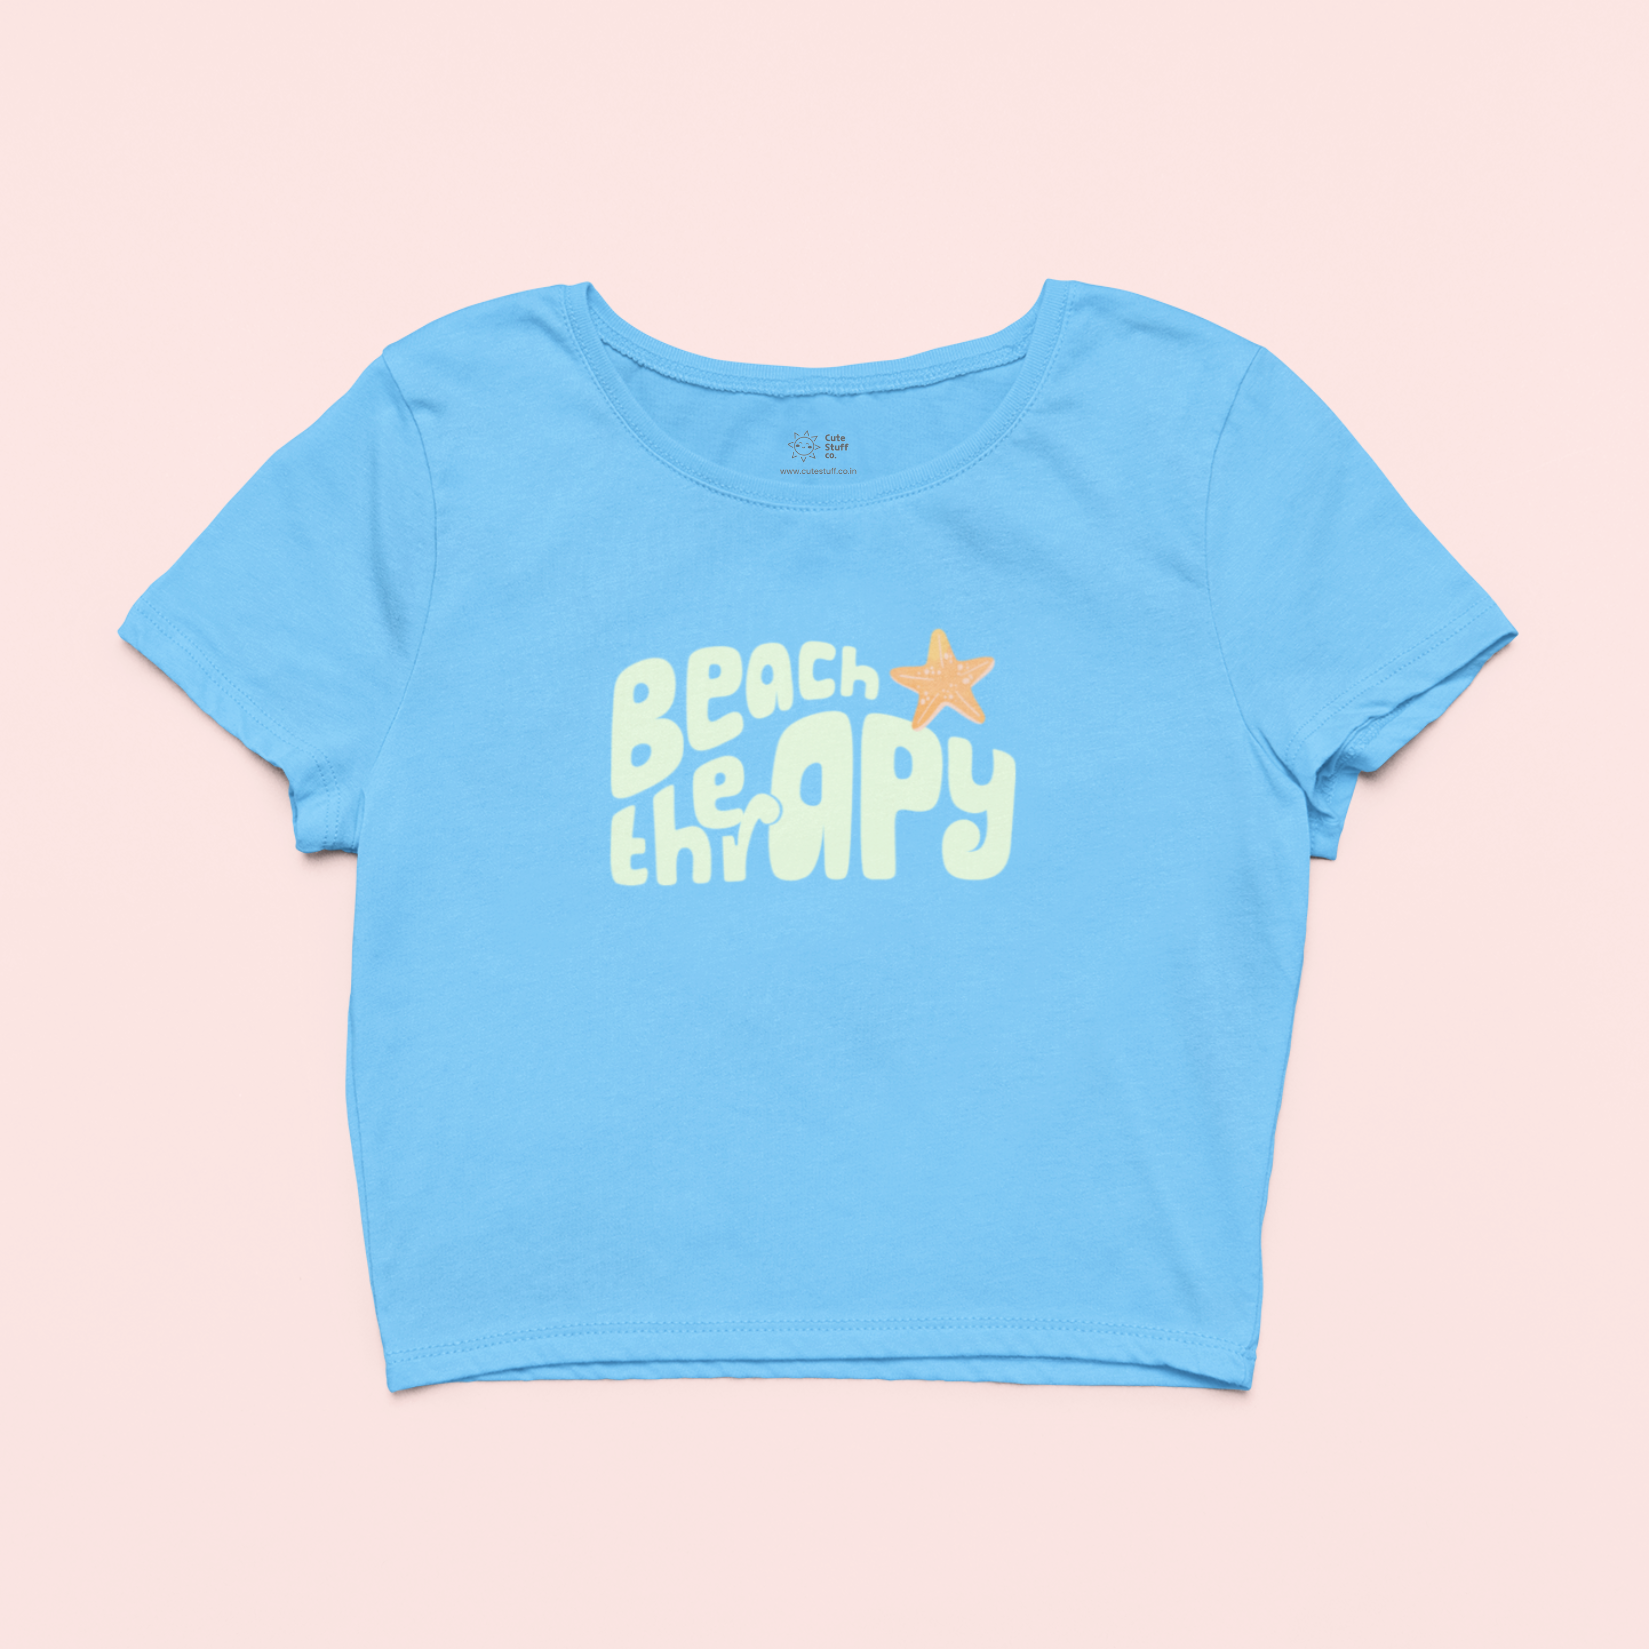 Beach Therapy Crop Tops By Cute Stuff Co. 180 GSM